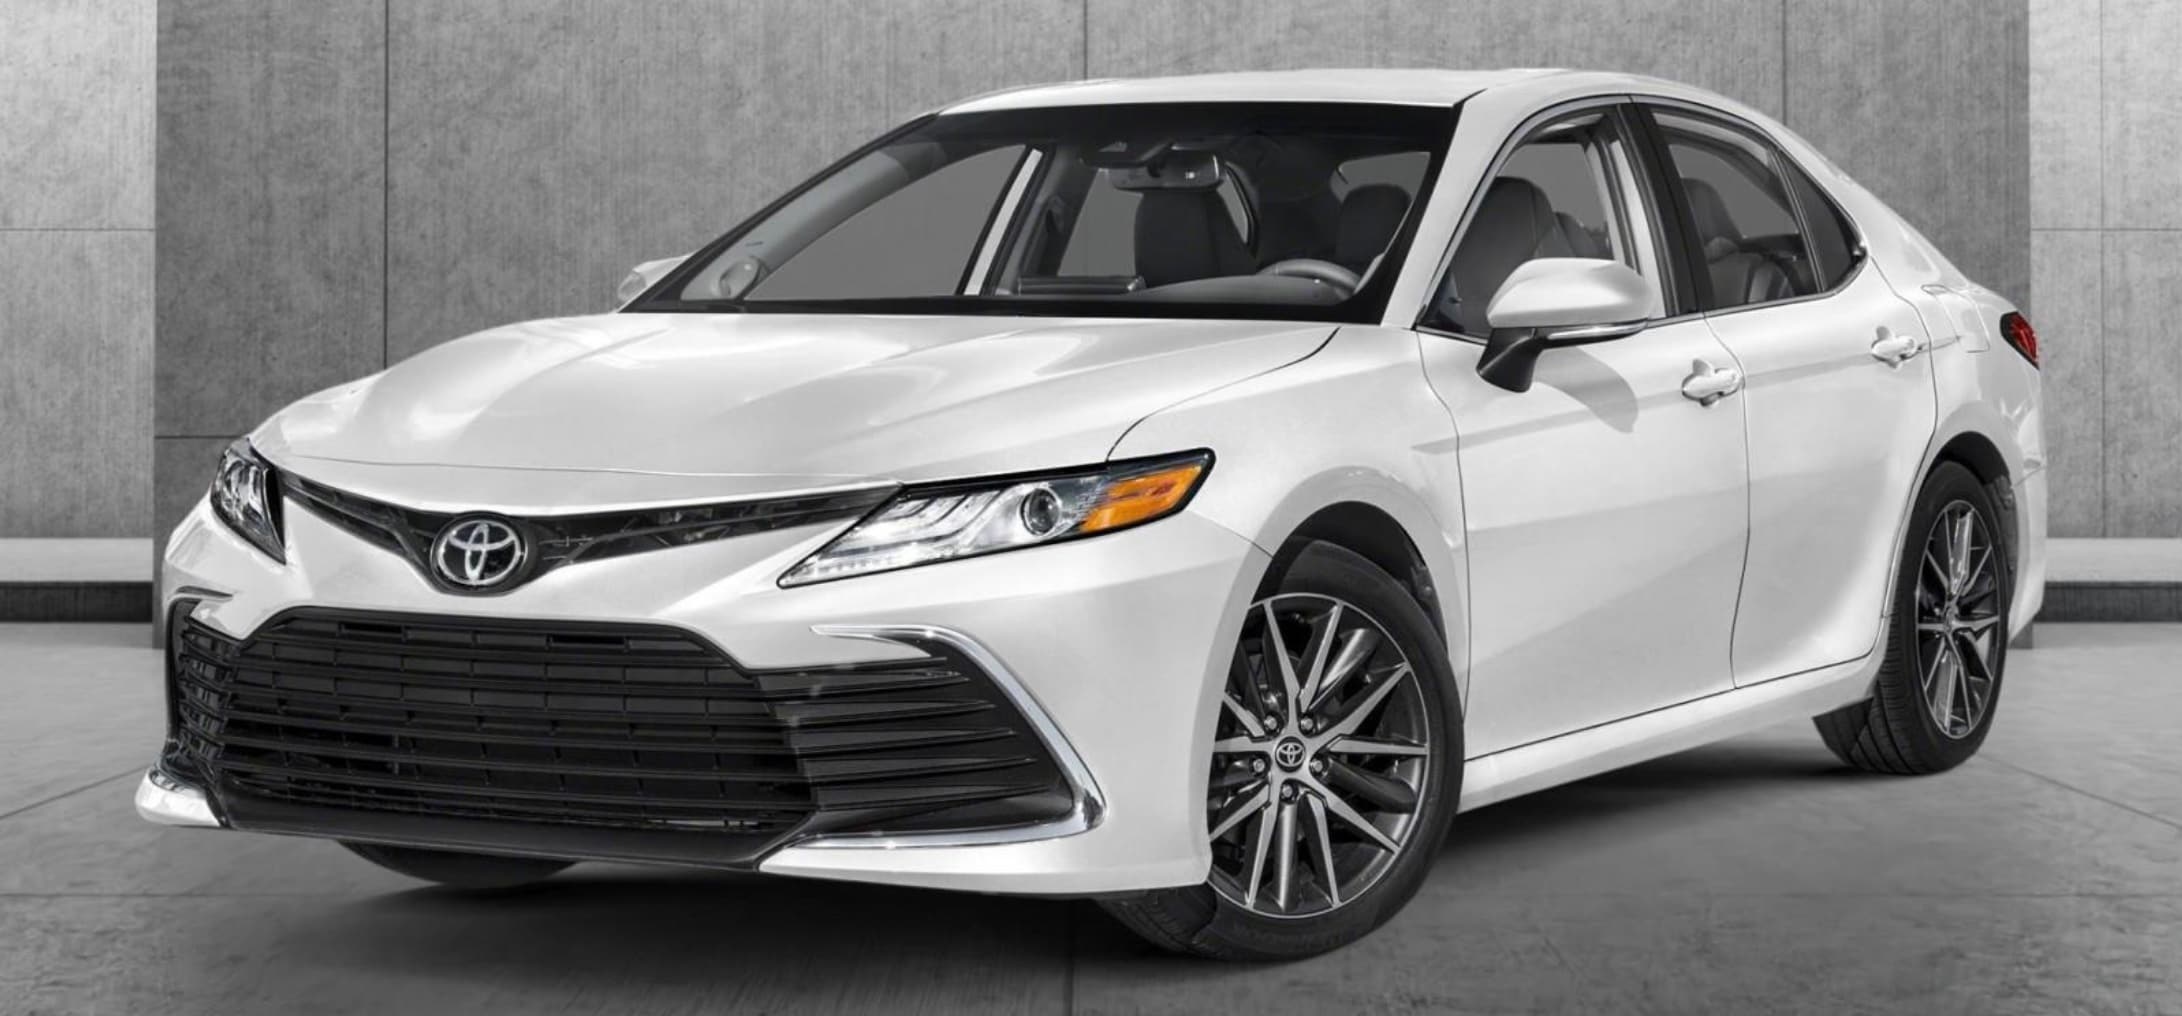 Toyota Camry In White